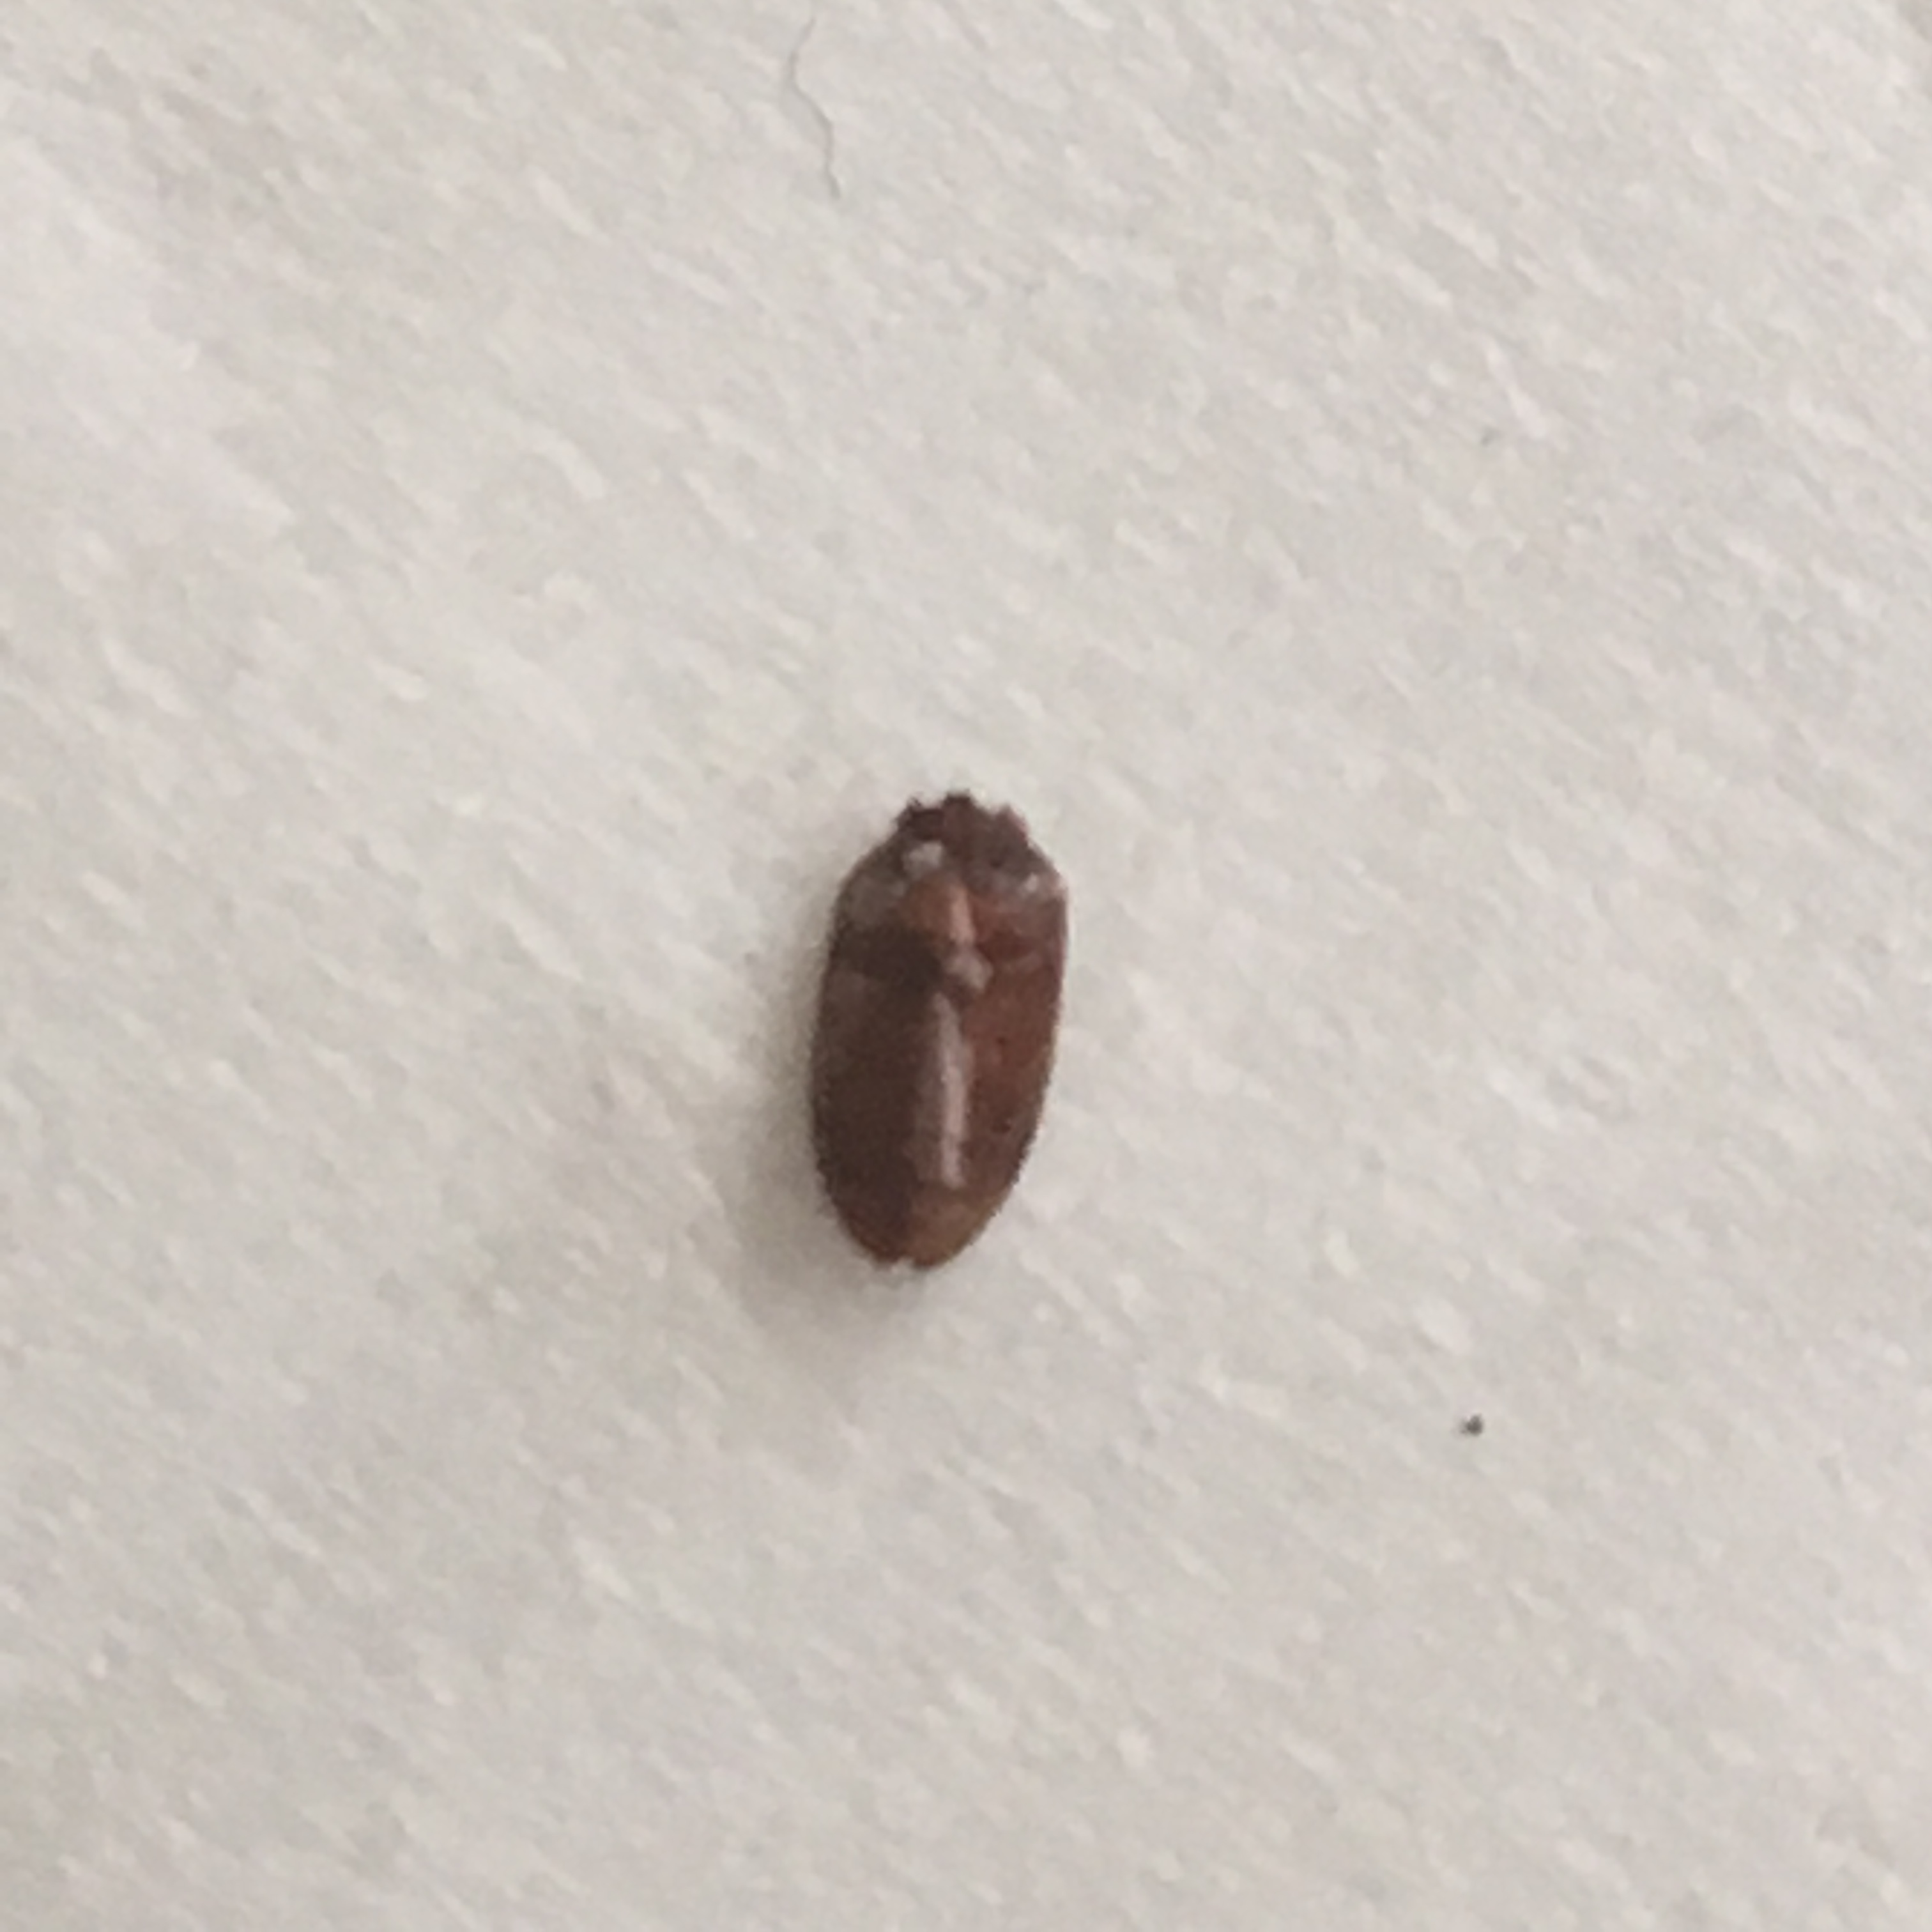 Little brown bug in hair - Ask Extension